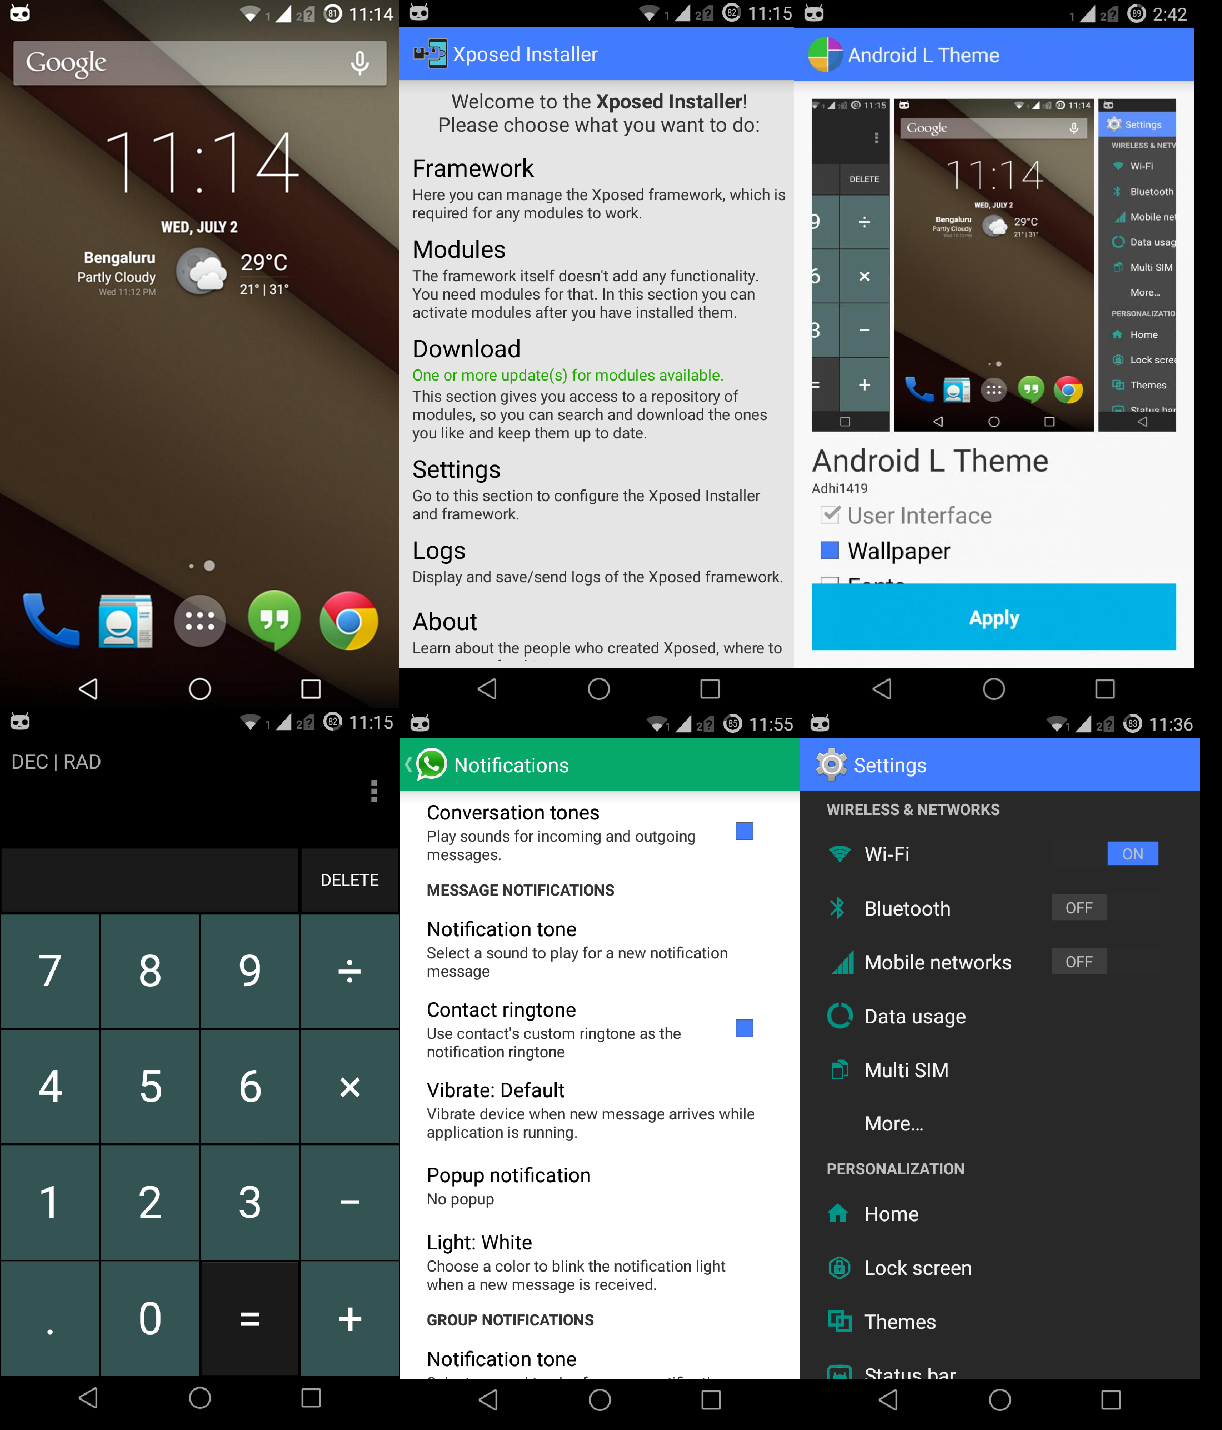 Android L Theme Package v1.1 for Android Devices